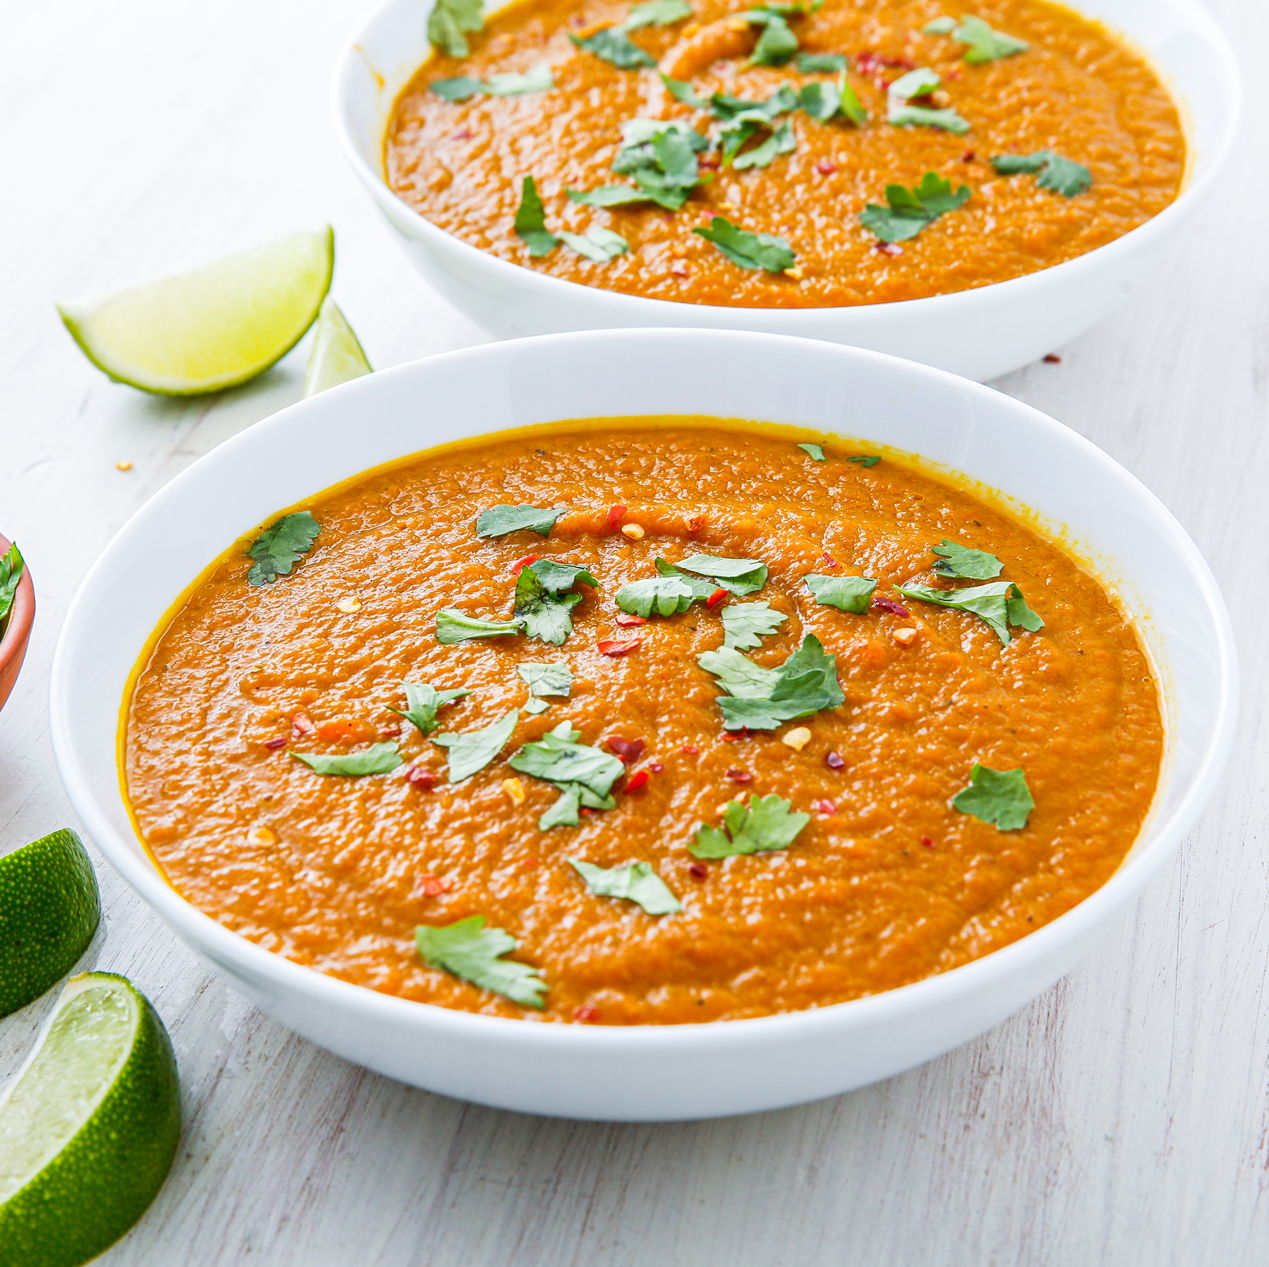 Best Carrot and Coriander Soup Recipe - How To Make Carrot and Coriander  Soup